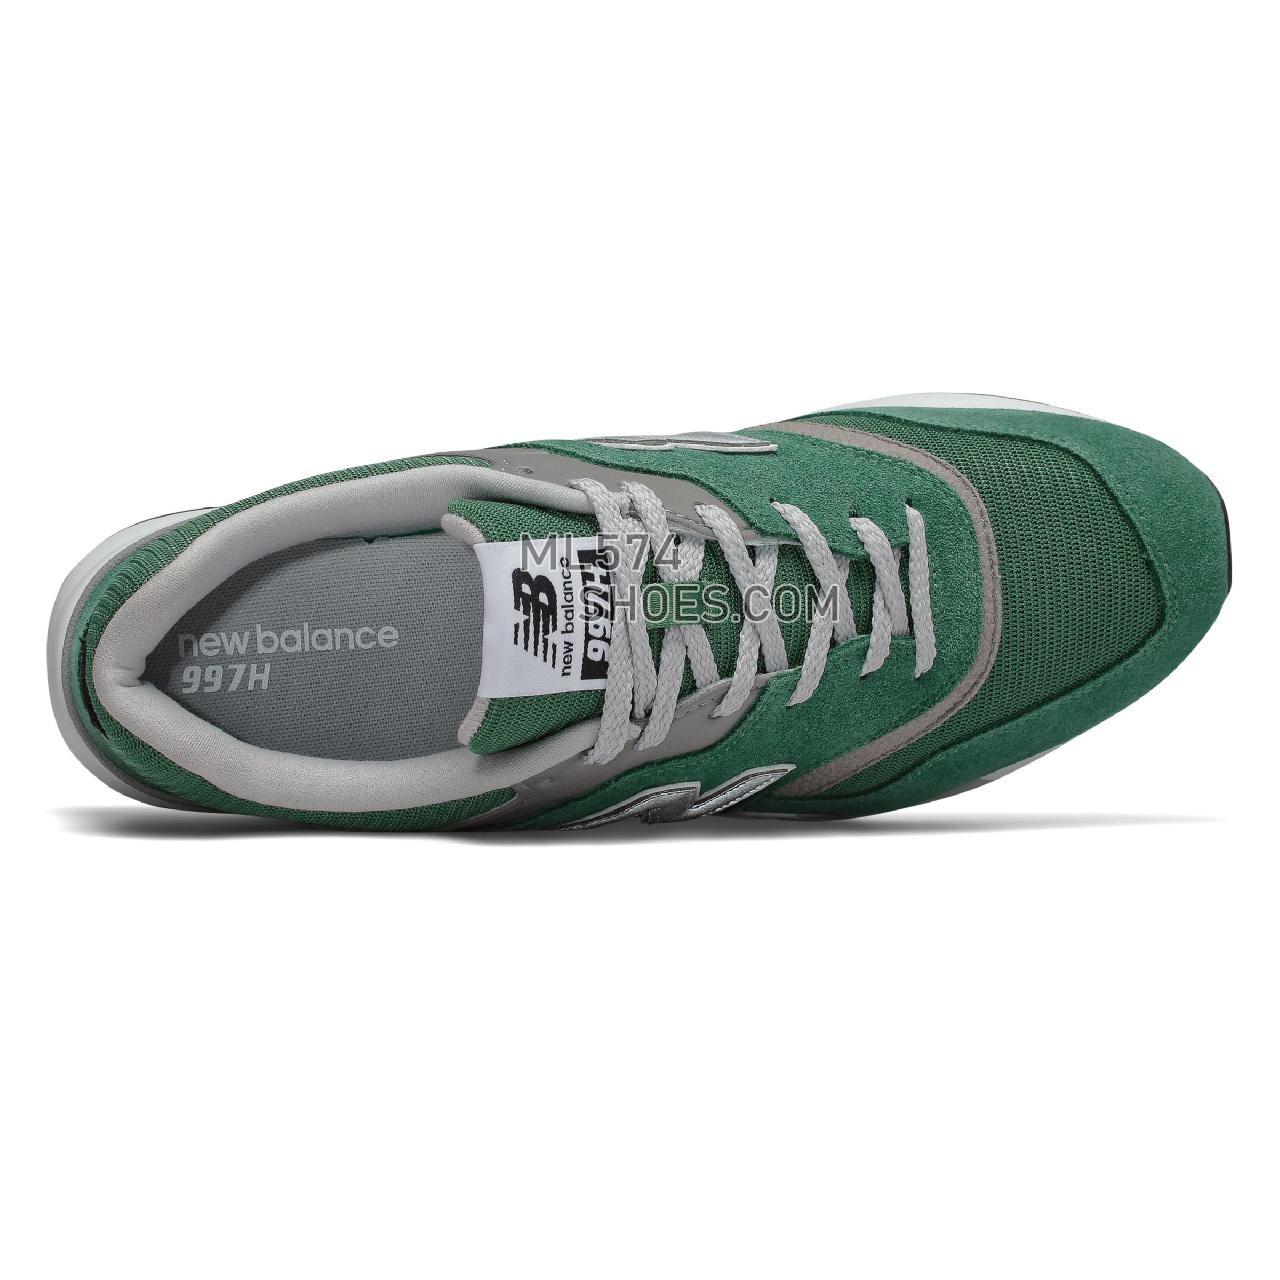 New Balance 997H - Men's 997H Classic CM997HV1-27438-M - Team Forest Green with Silver - CM997HXM